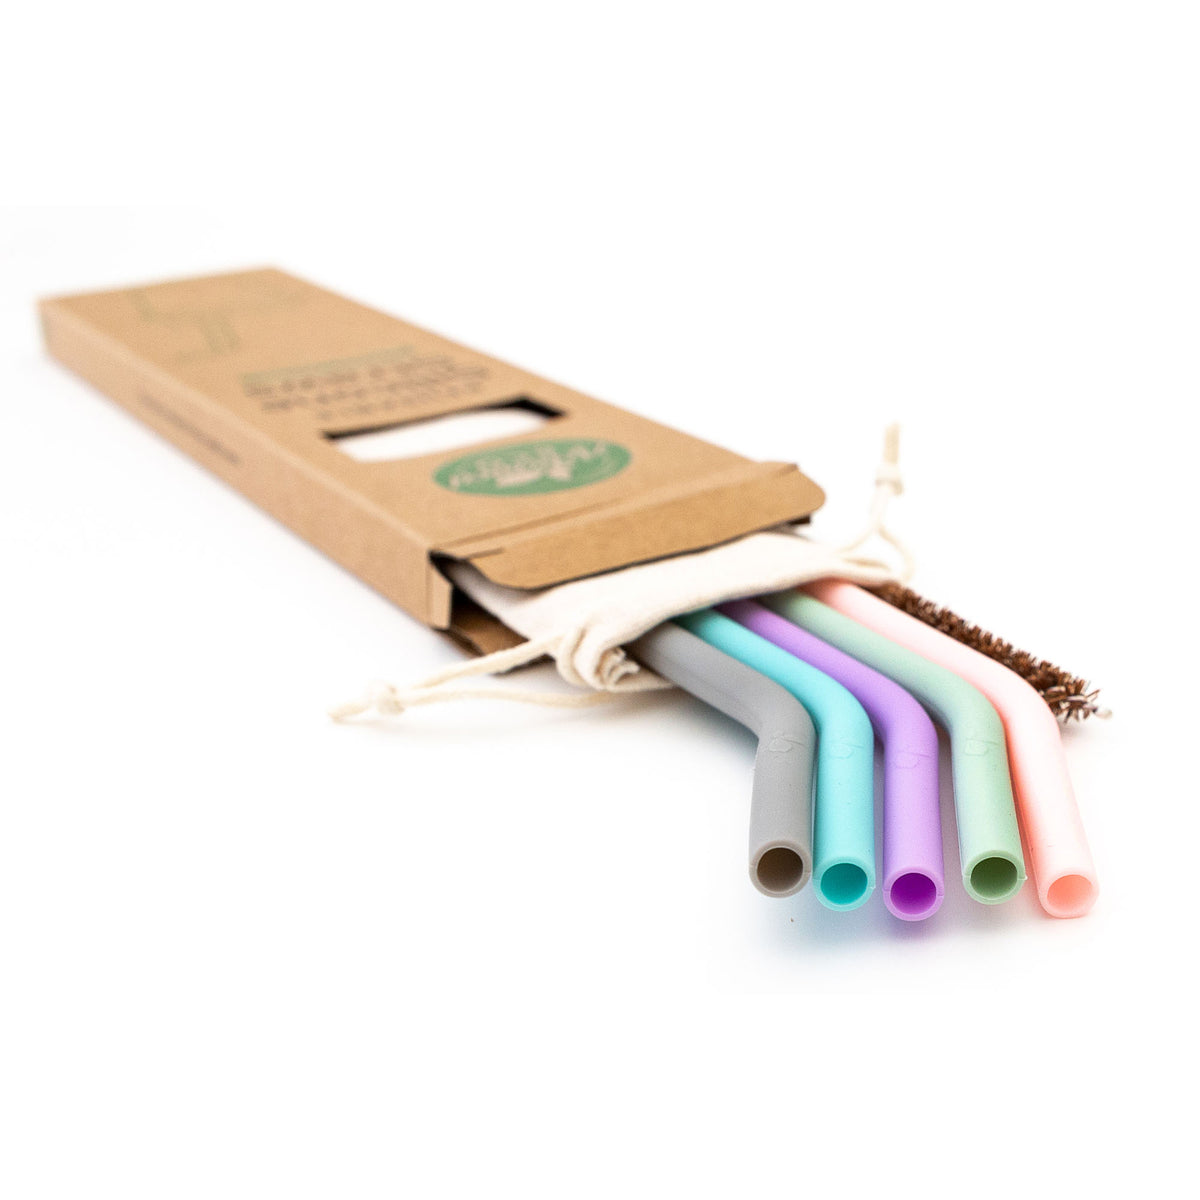 Reusable Silicone Straws Pastel 5 Pack